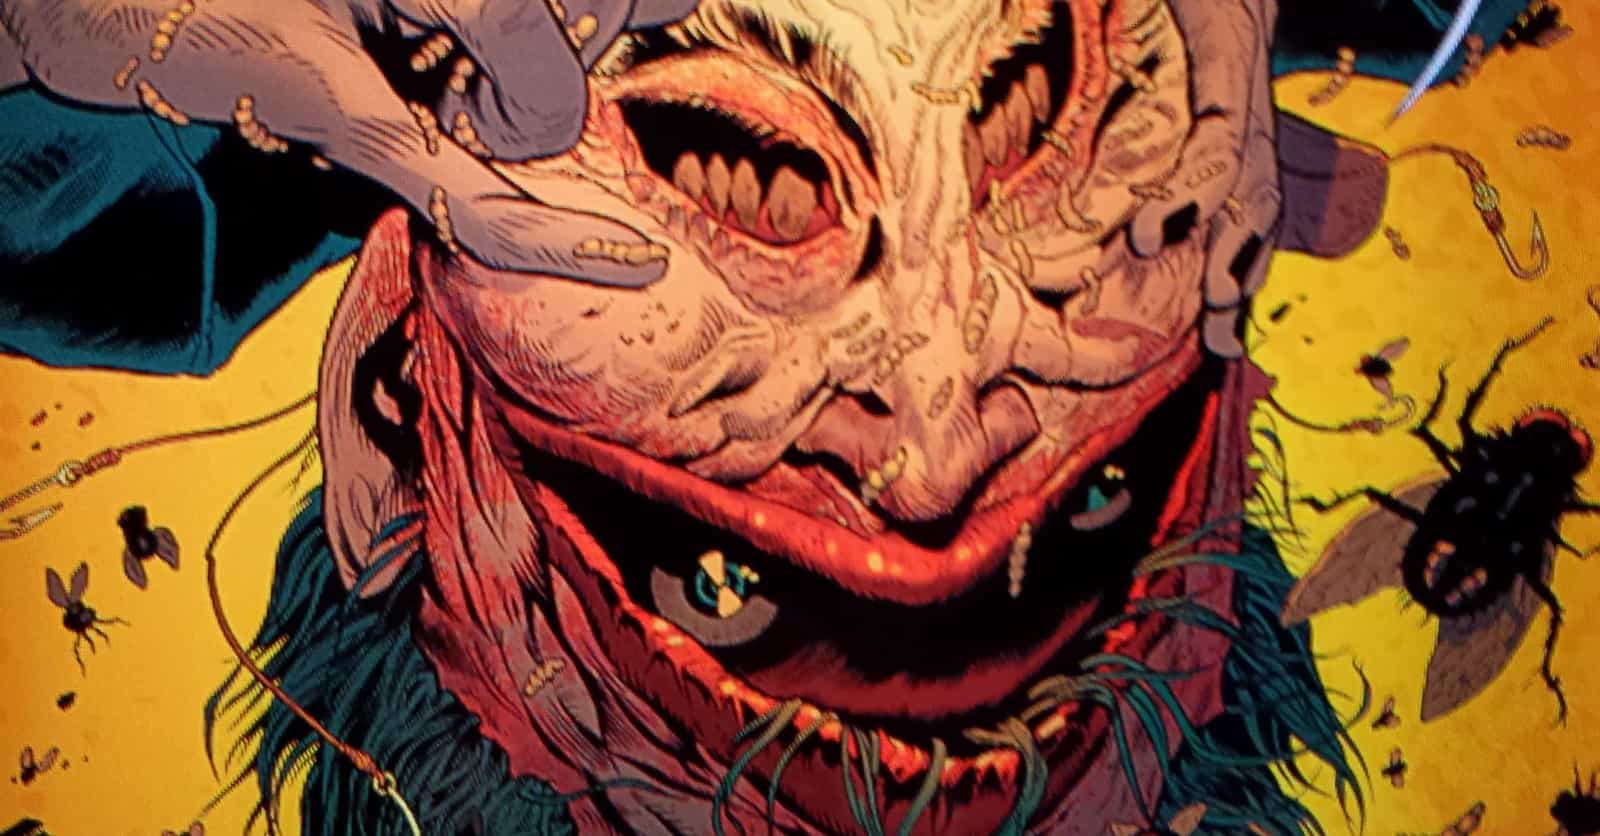 We Found The Most Disturbing Panels Of The Joker In Comic Book History